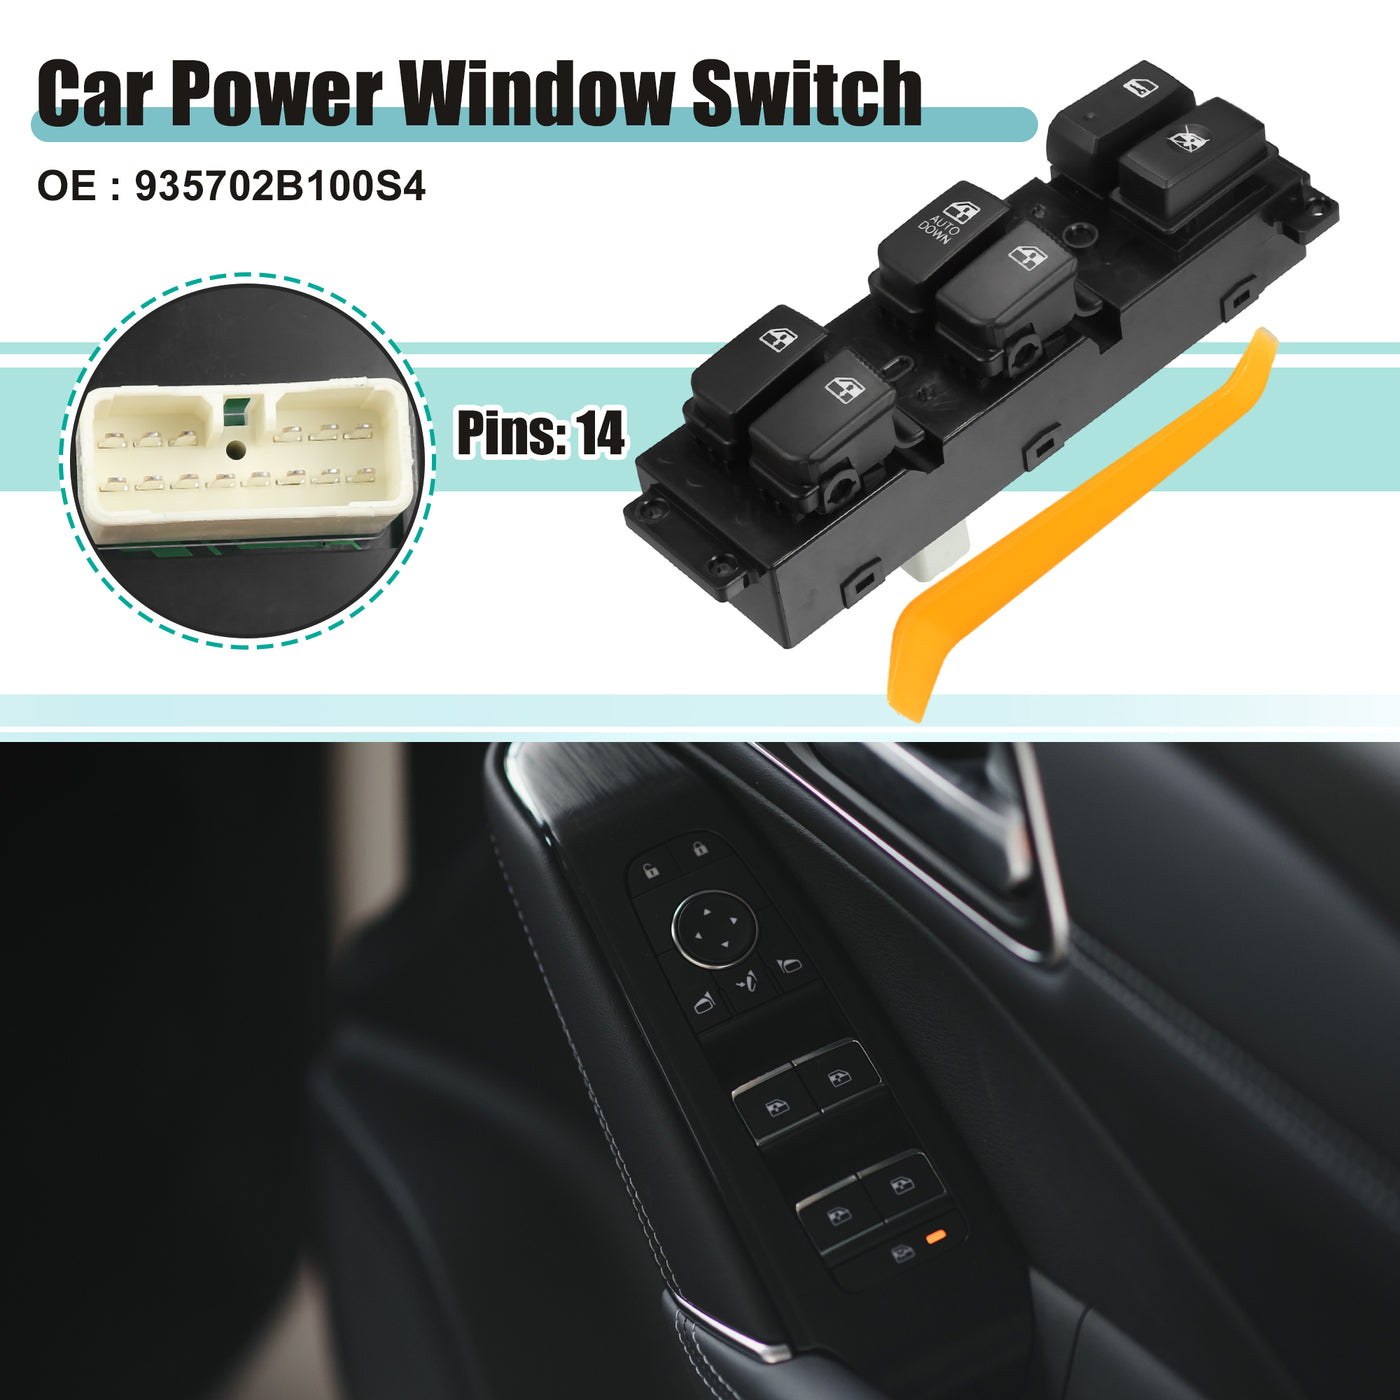 ACROPIX Power Window Switch Window Control Switch Fit for Hyundai Santa Fe 2007-2009 with Removal Tool No.935702B100S4 - Pack of 1